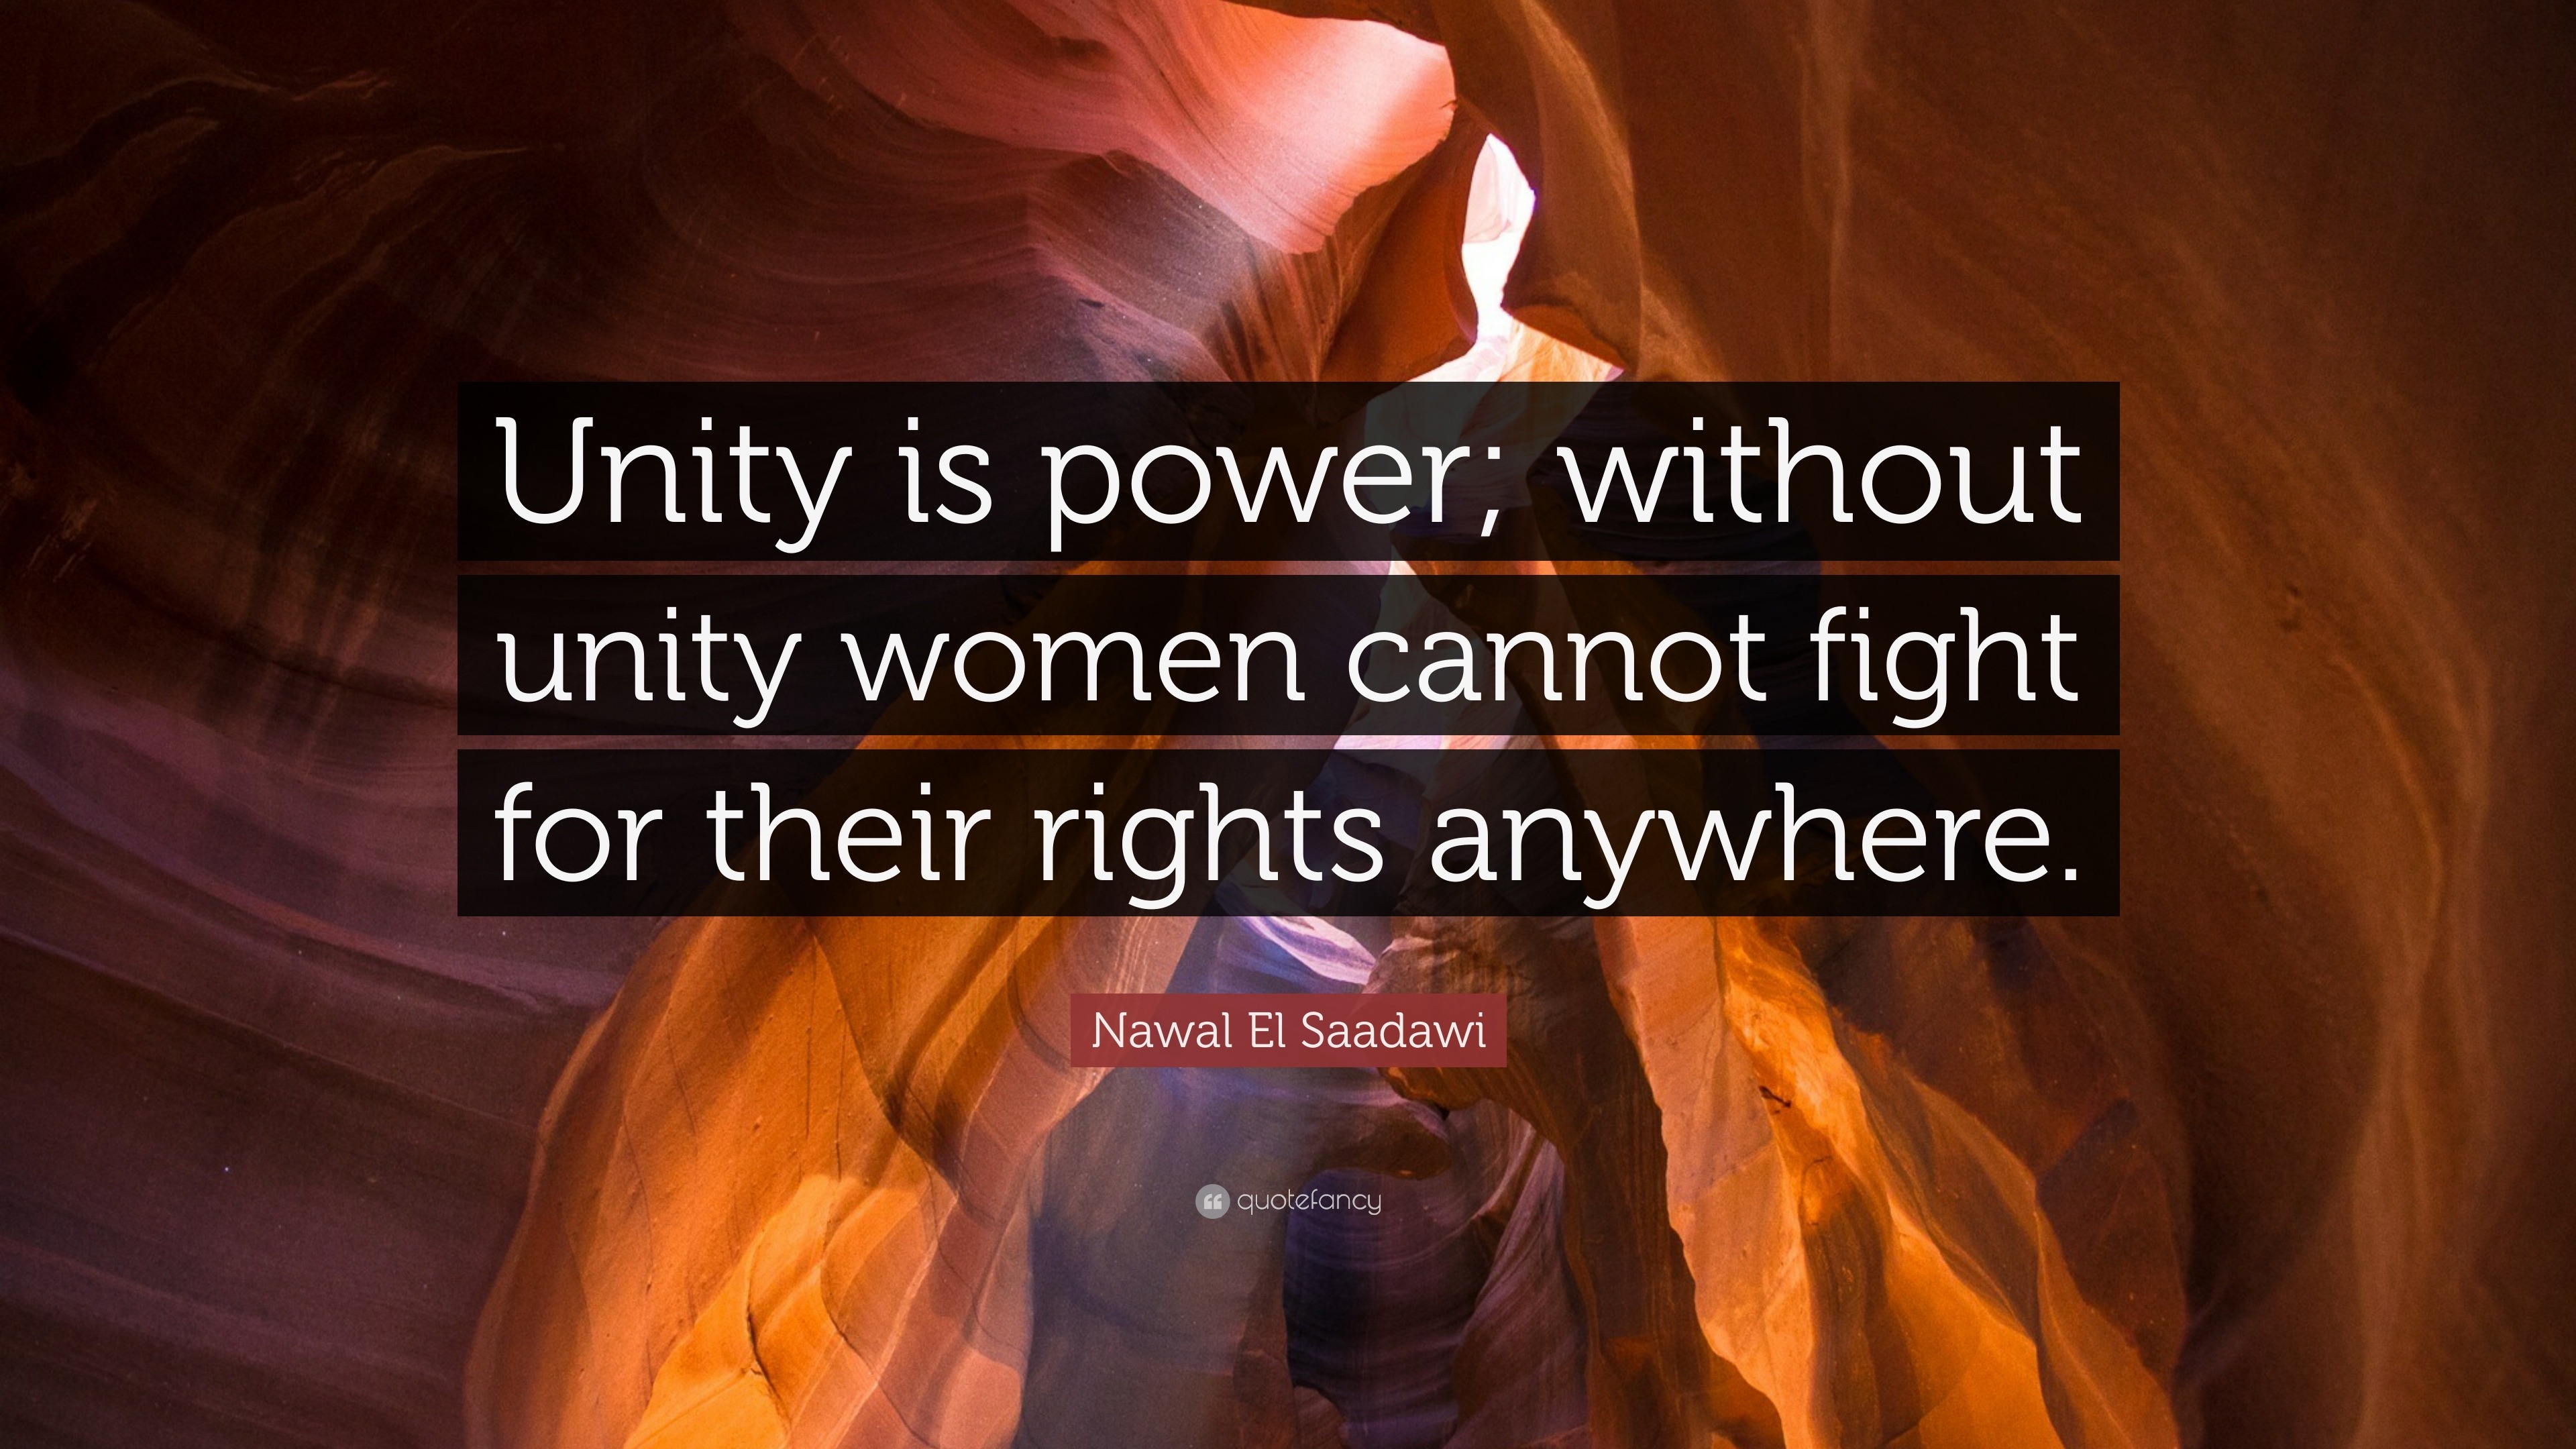 Nawal El Saadawi Quote Unity Is Power Without Unity Women Cannot Fight For Their Rights Anywhere